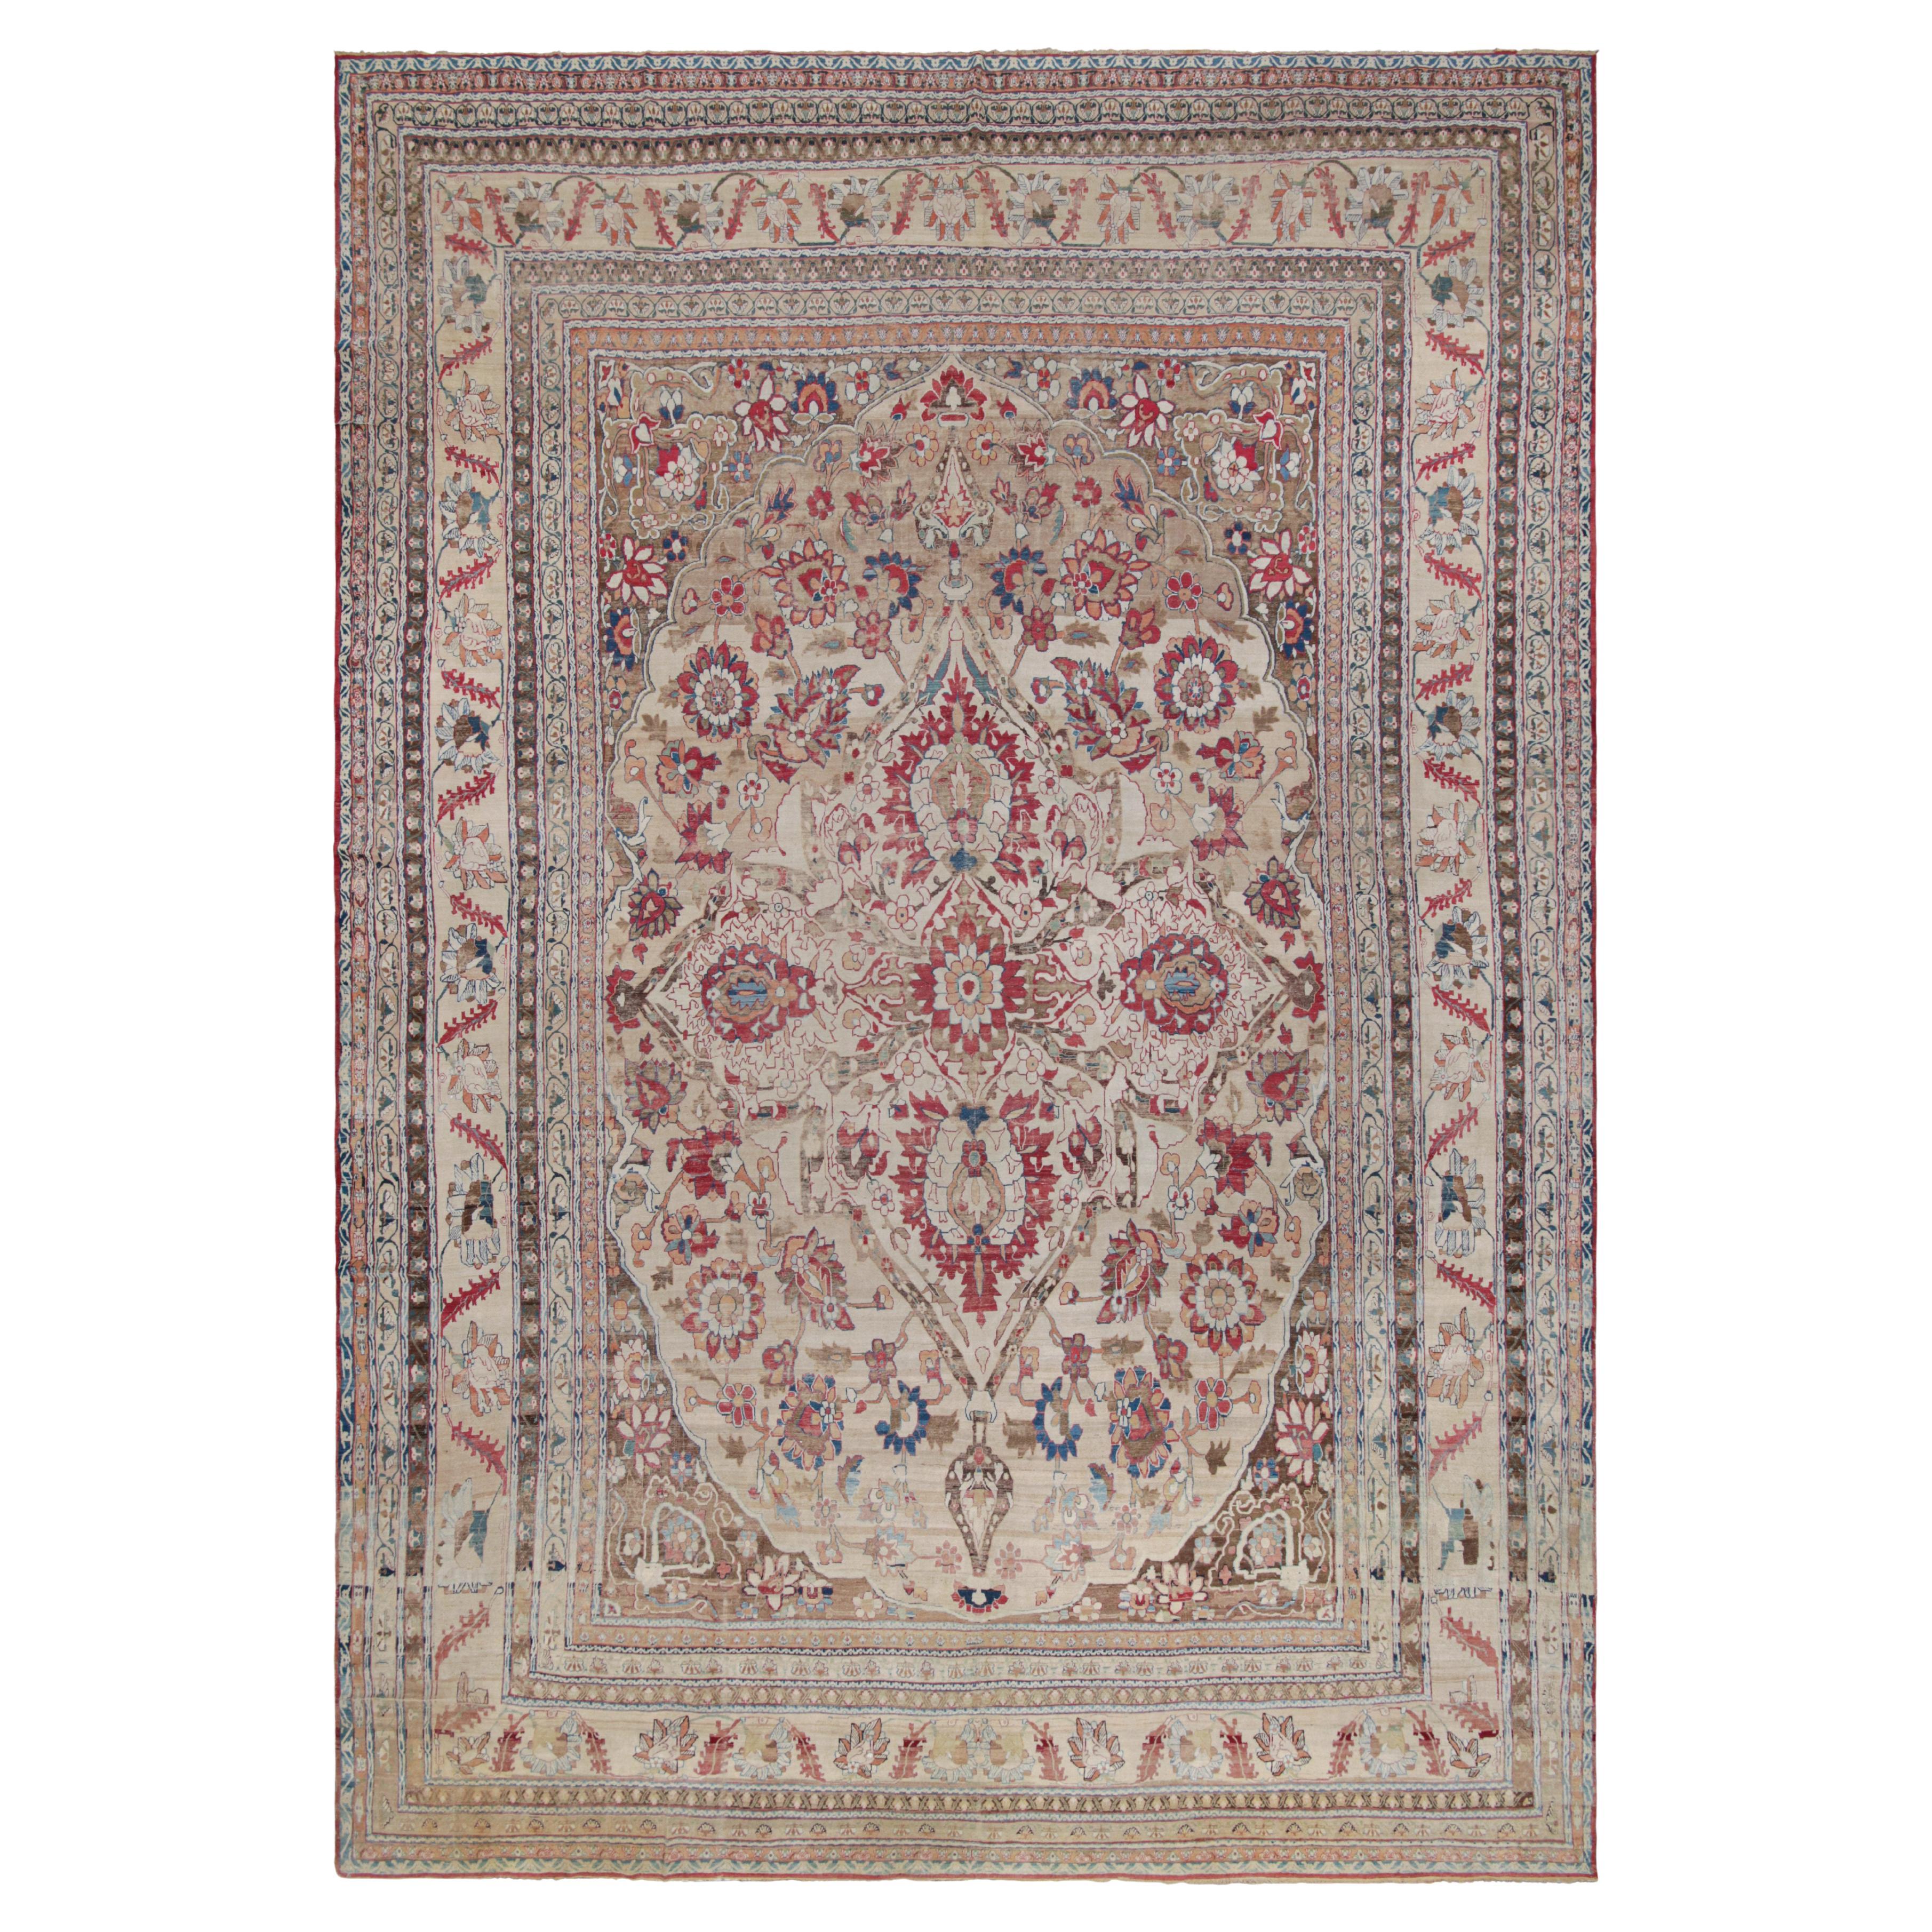 Oversized Antique Persian Kermanshah Rug with Floral Patterns, from Rug & Kilim